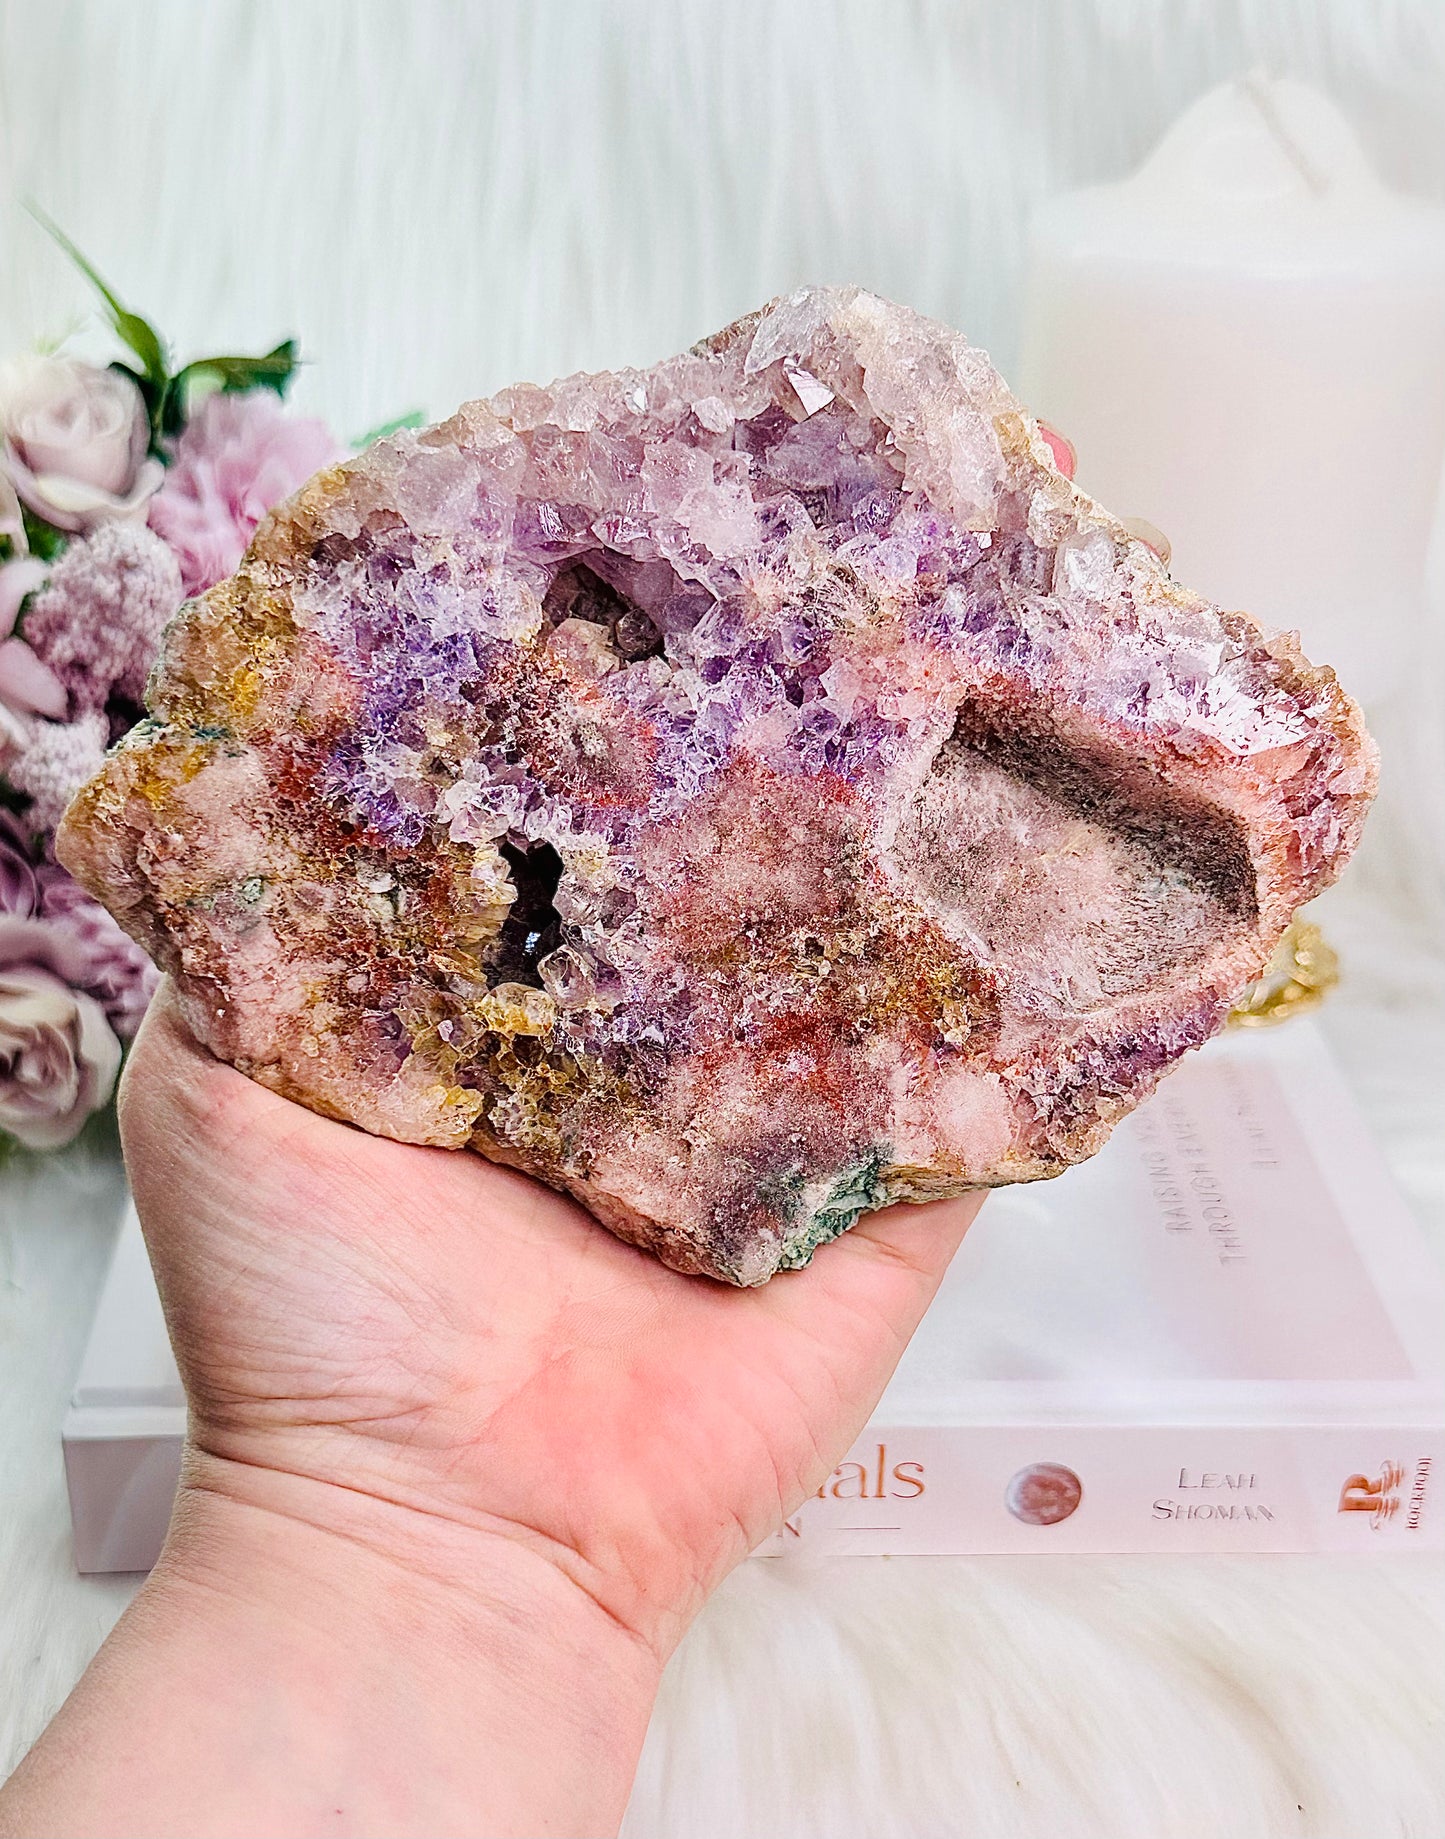 Classy & Absolutely Fabulous Druzy Pink Amethyst Slab A Chunky 483grams 15cm On Stand